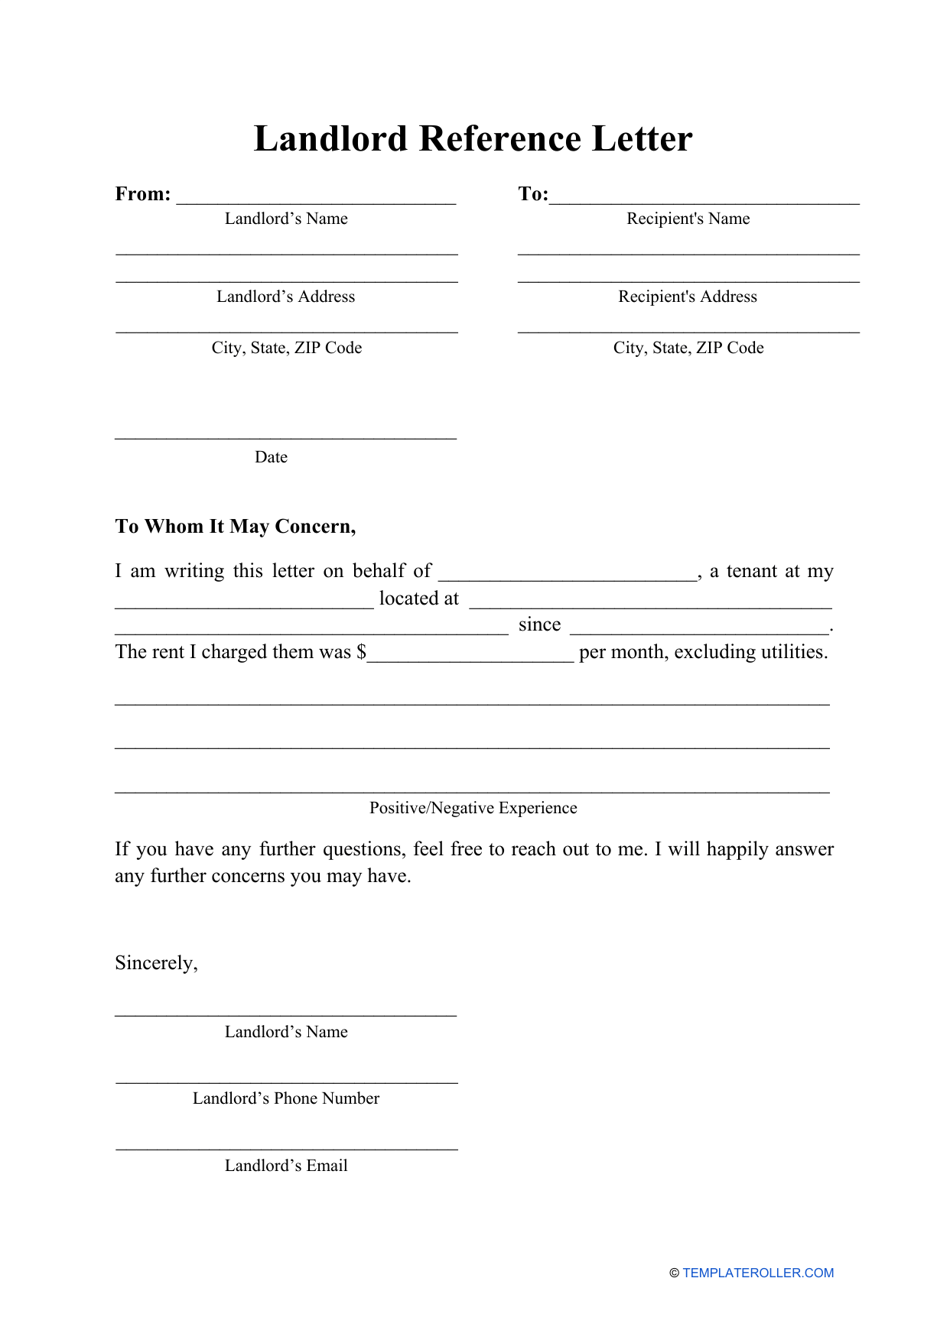 landlord-reference-letter-template-download-printable-pdf-templateroller